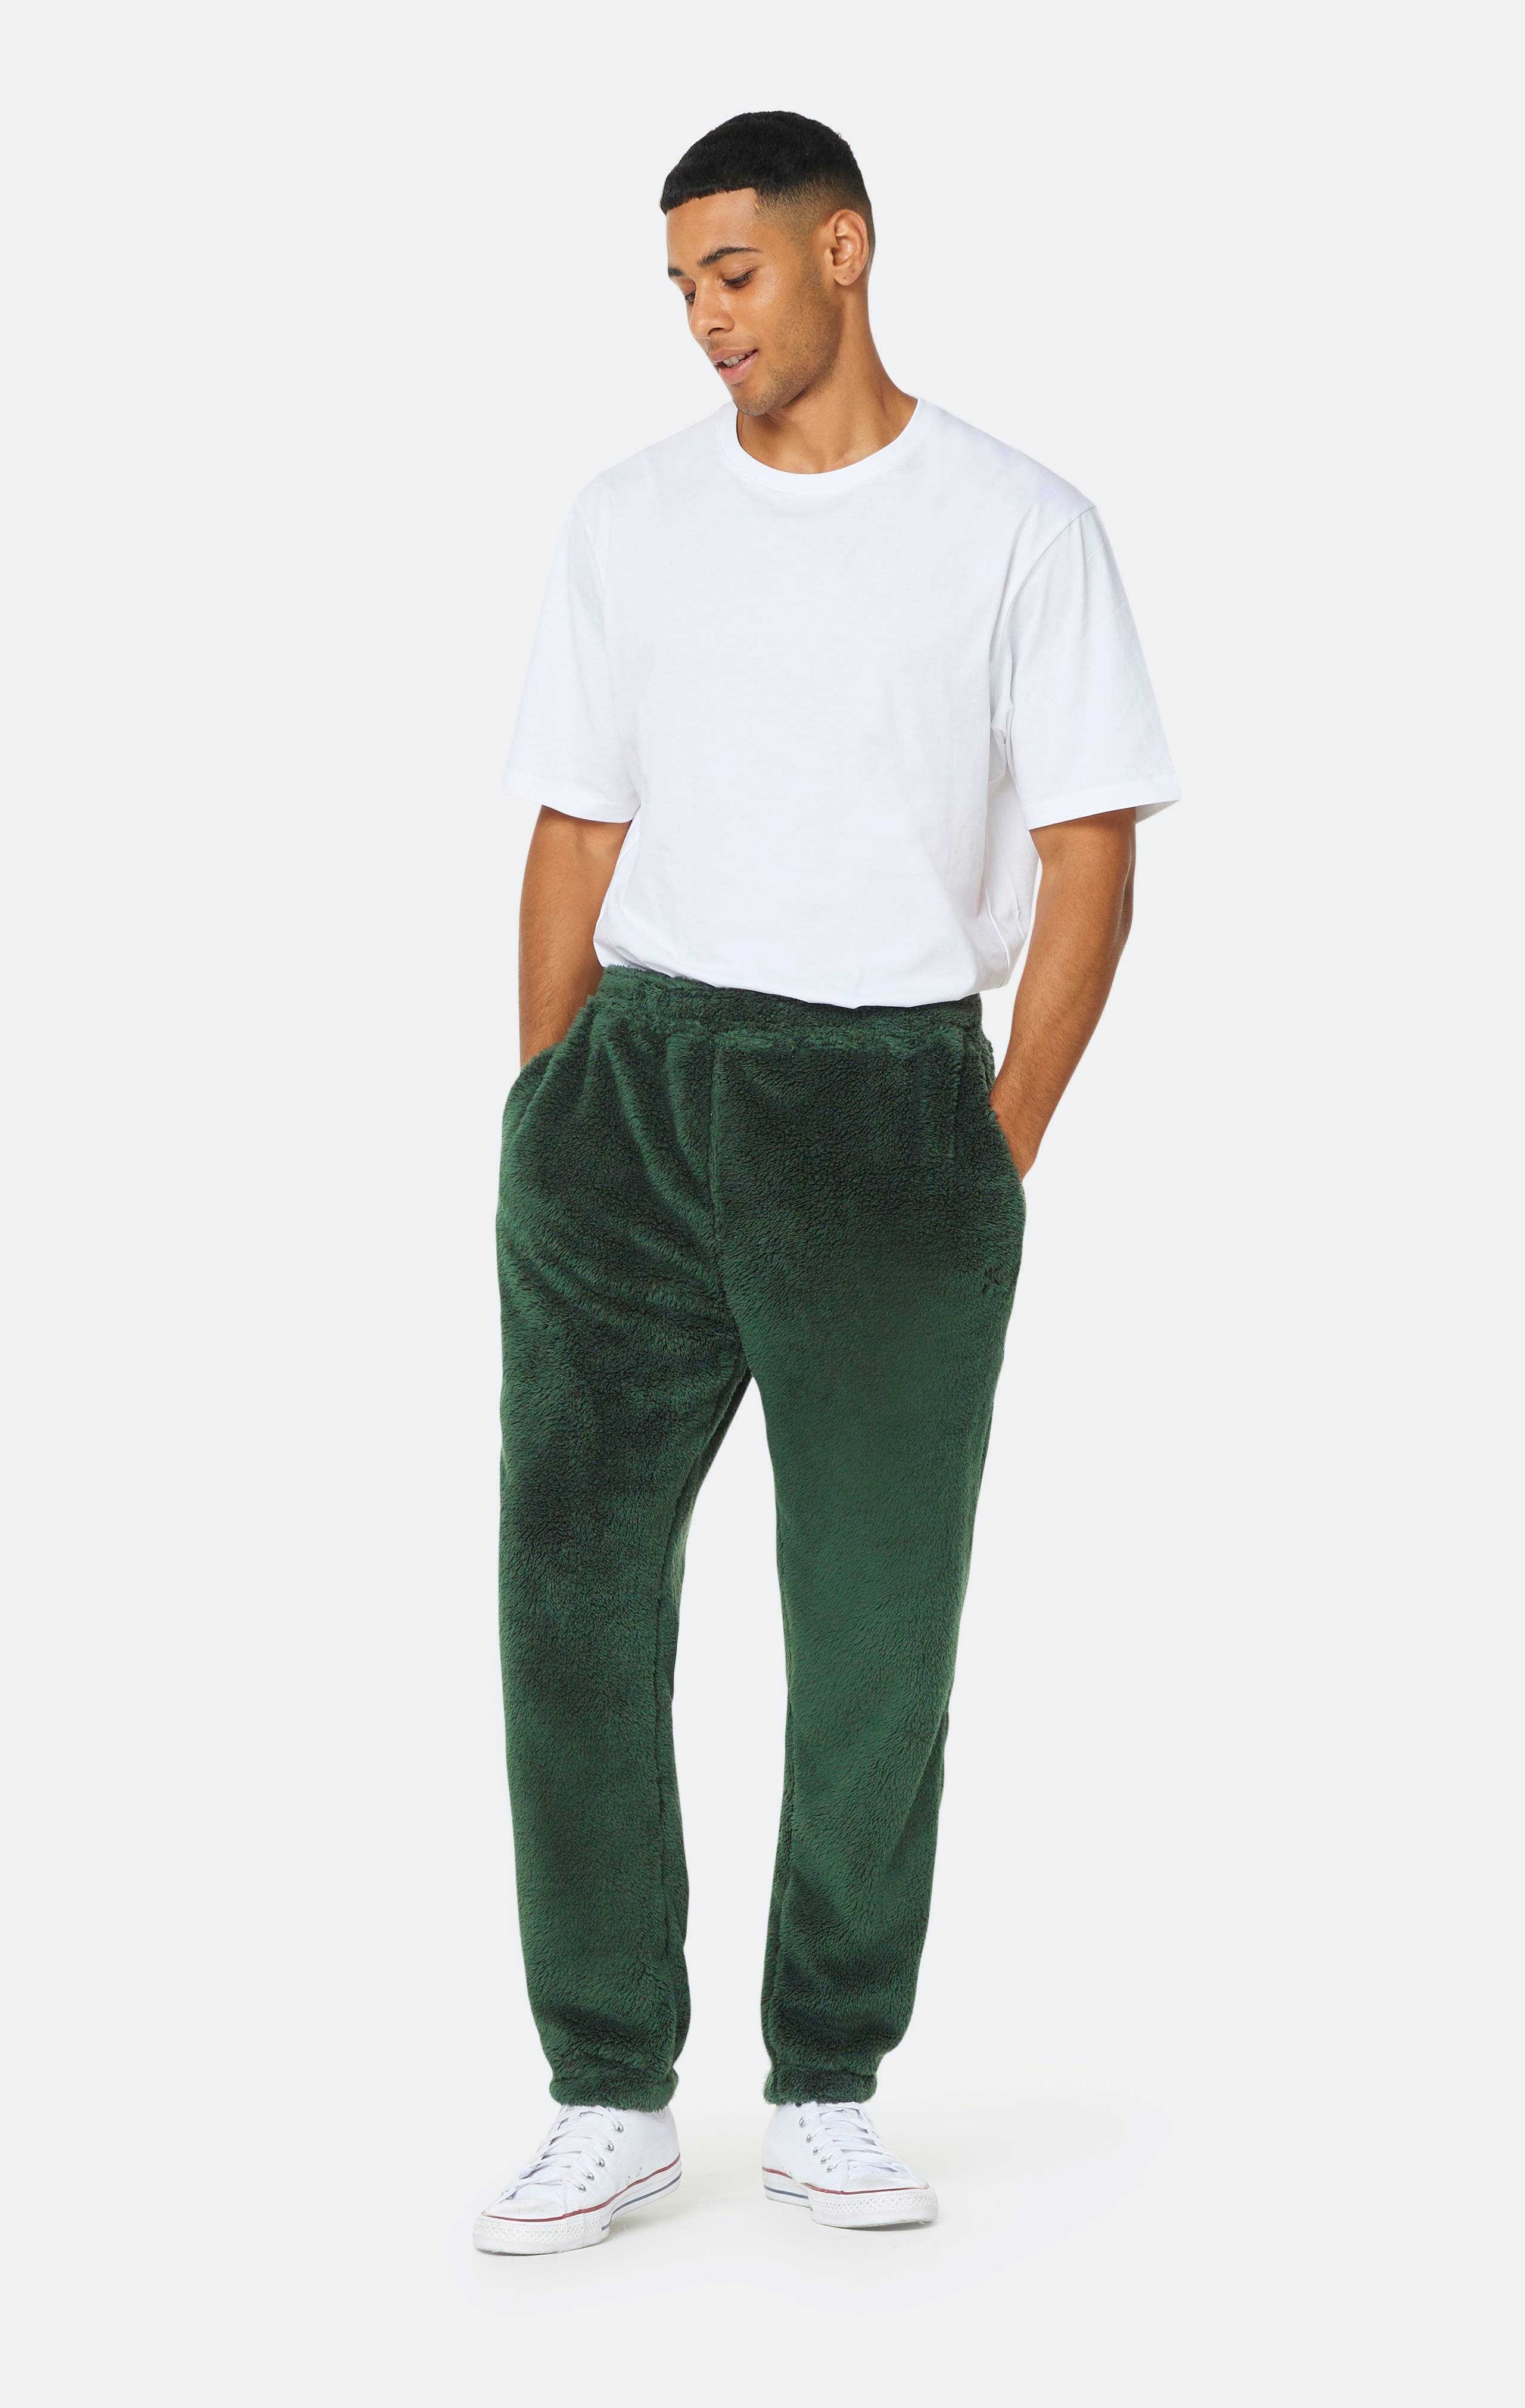 Onepiece The Puppy Pant Green - 2